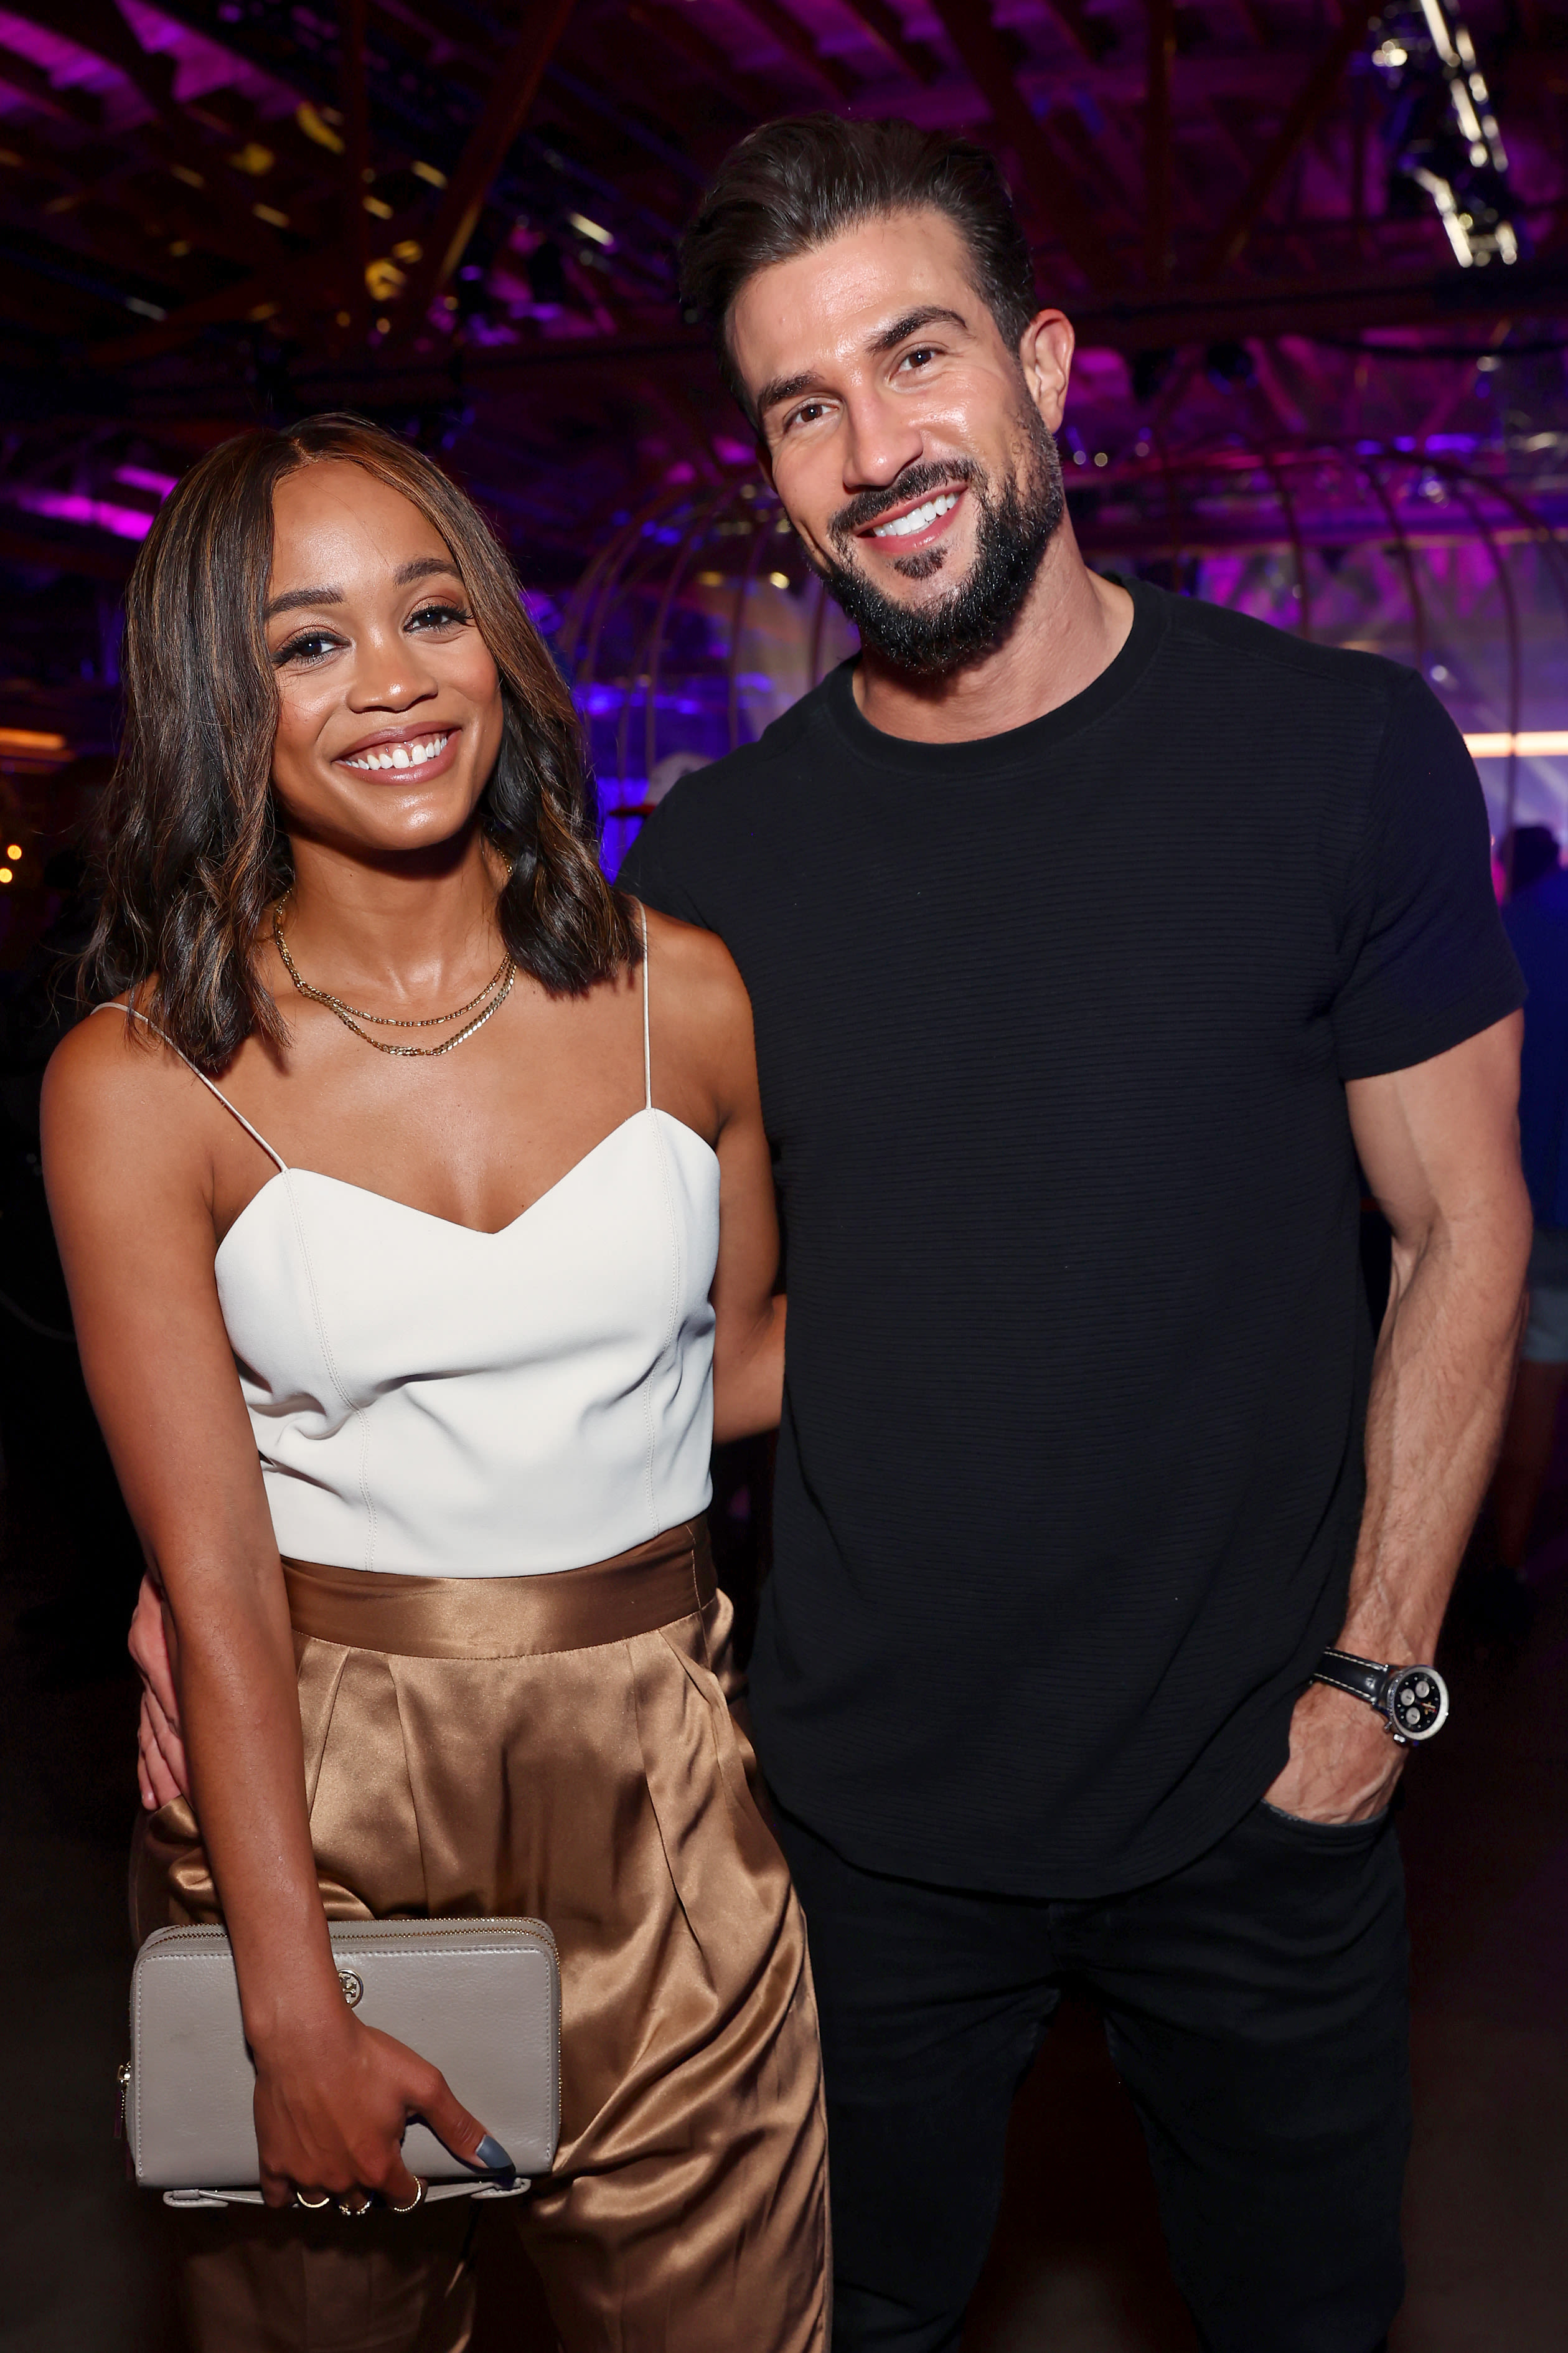 The Bachelorette’s Rachel Lindsay and Bryan Abasolo Are Living Together Amid Divorce